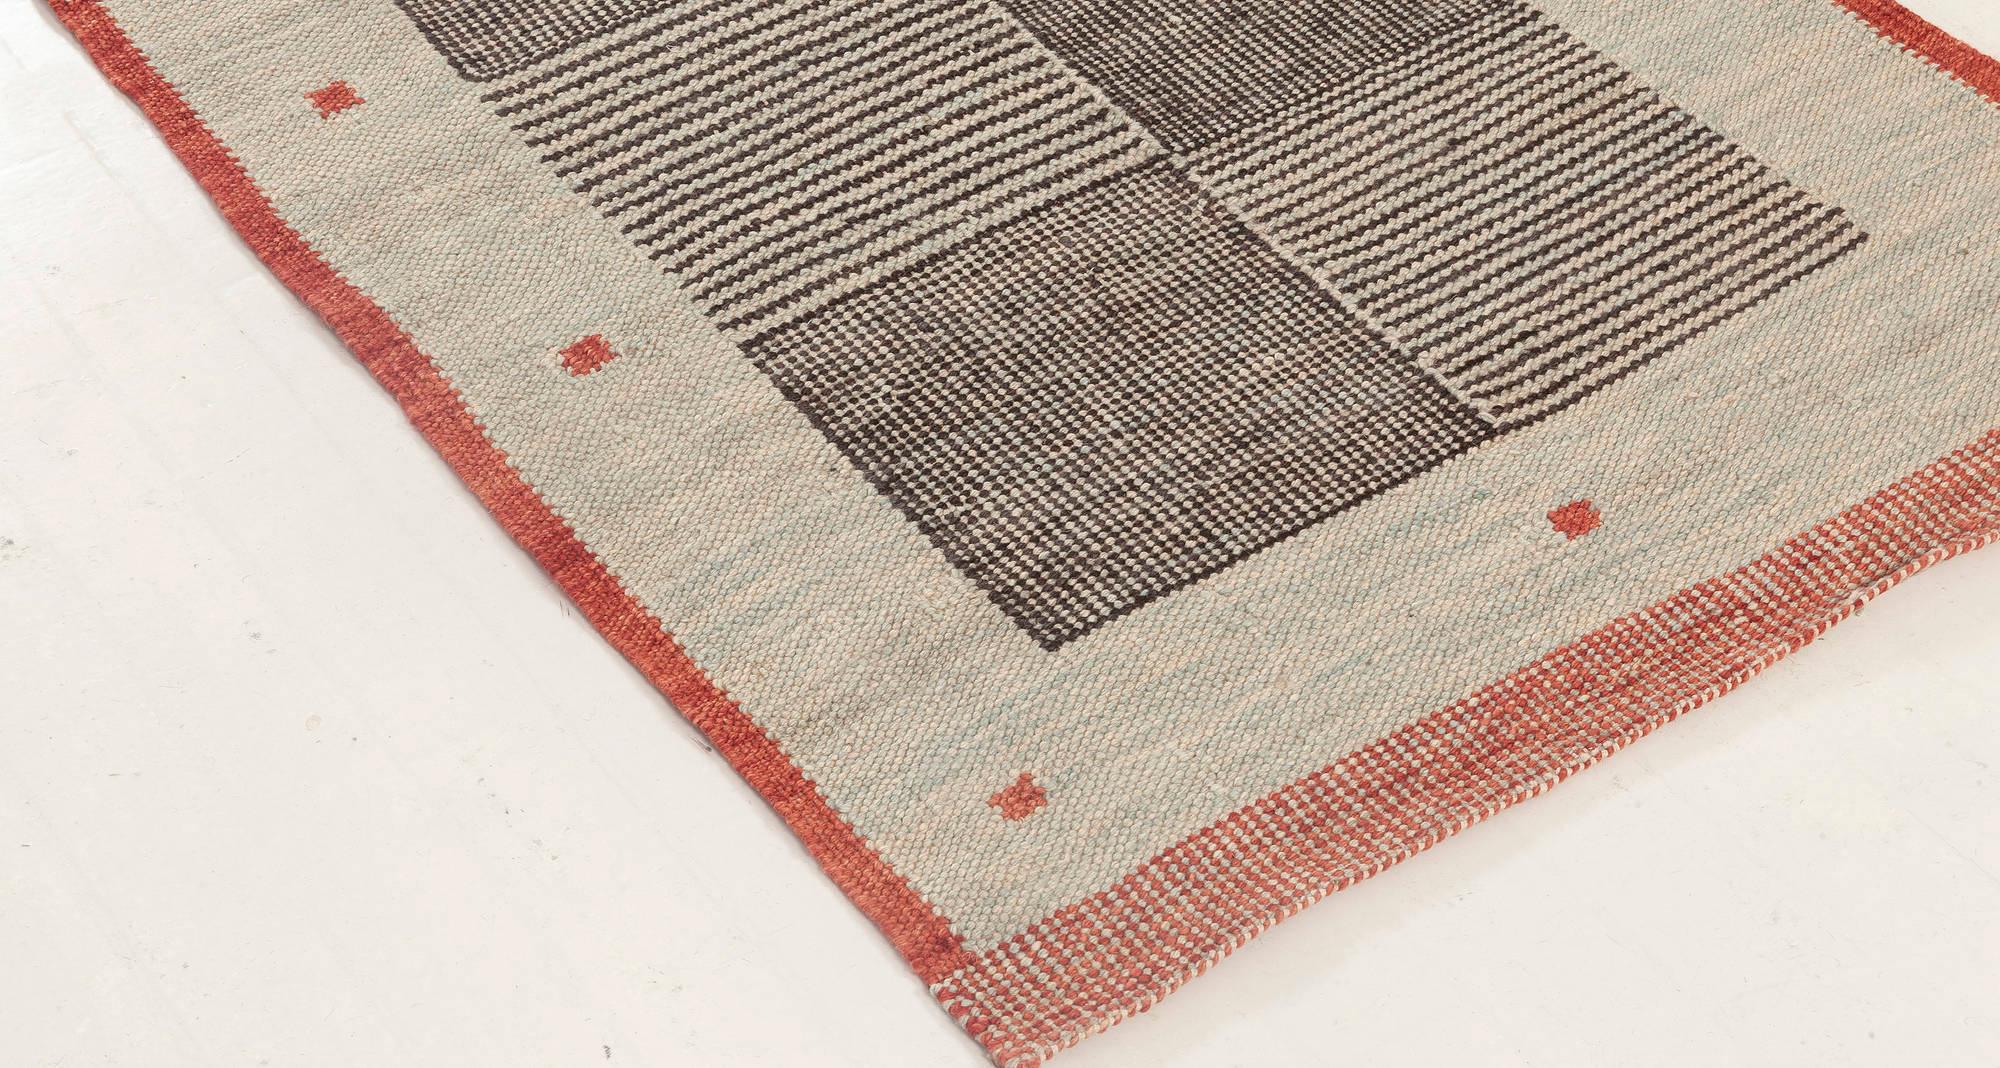 Contemporary 21st Century Swedish Style Beige, Black and Red Flat-Weave Wool Runner